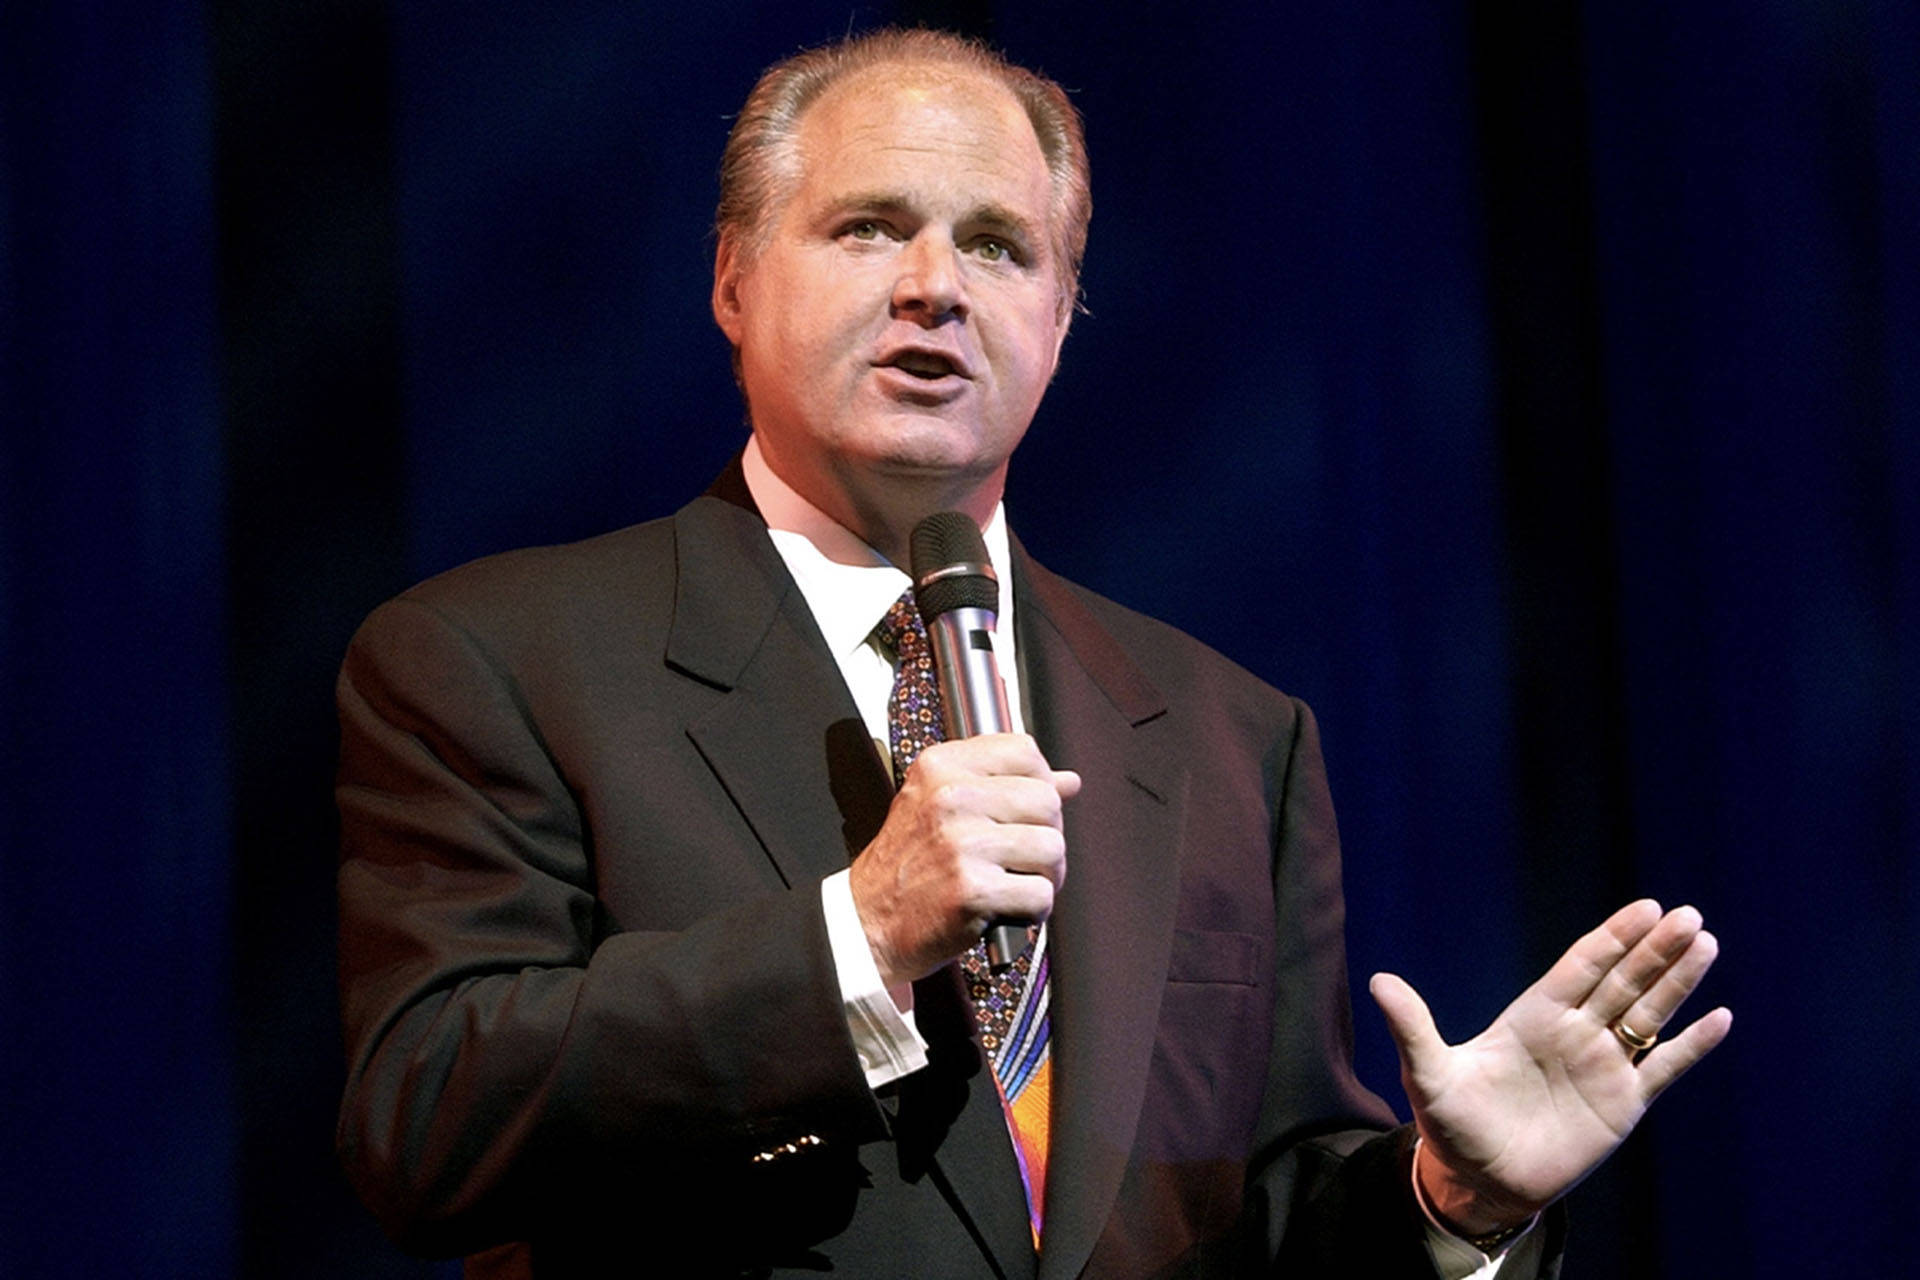 Rush Limbaugh At Ford Theatre